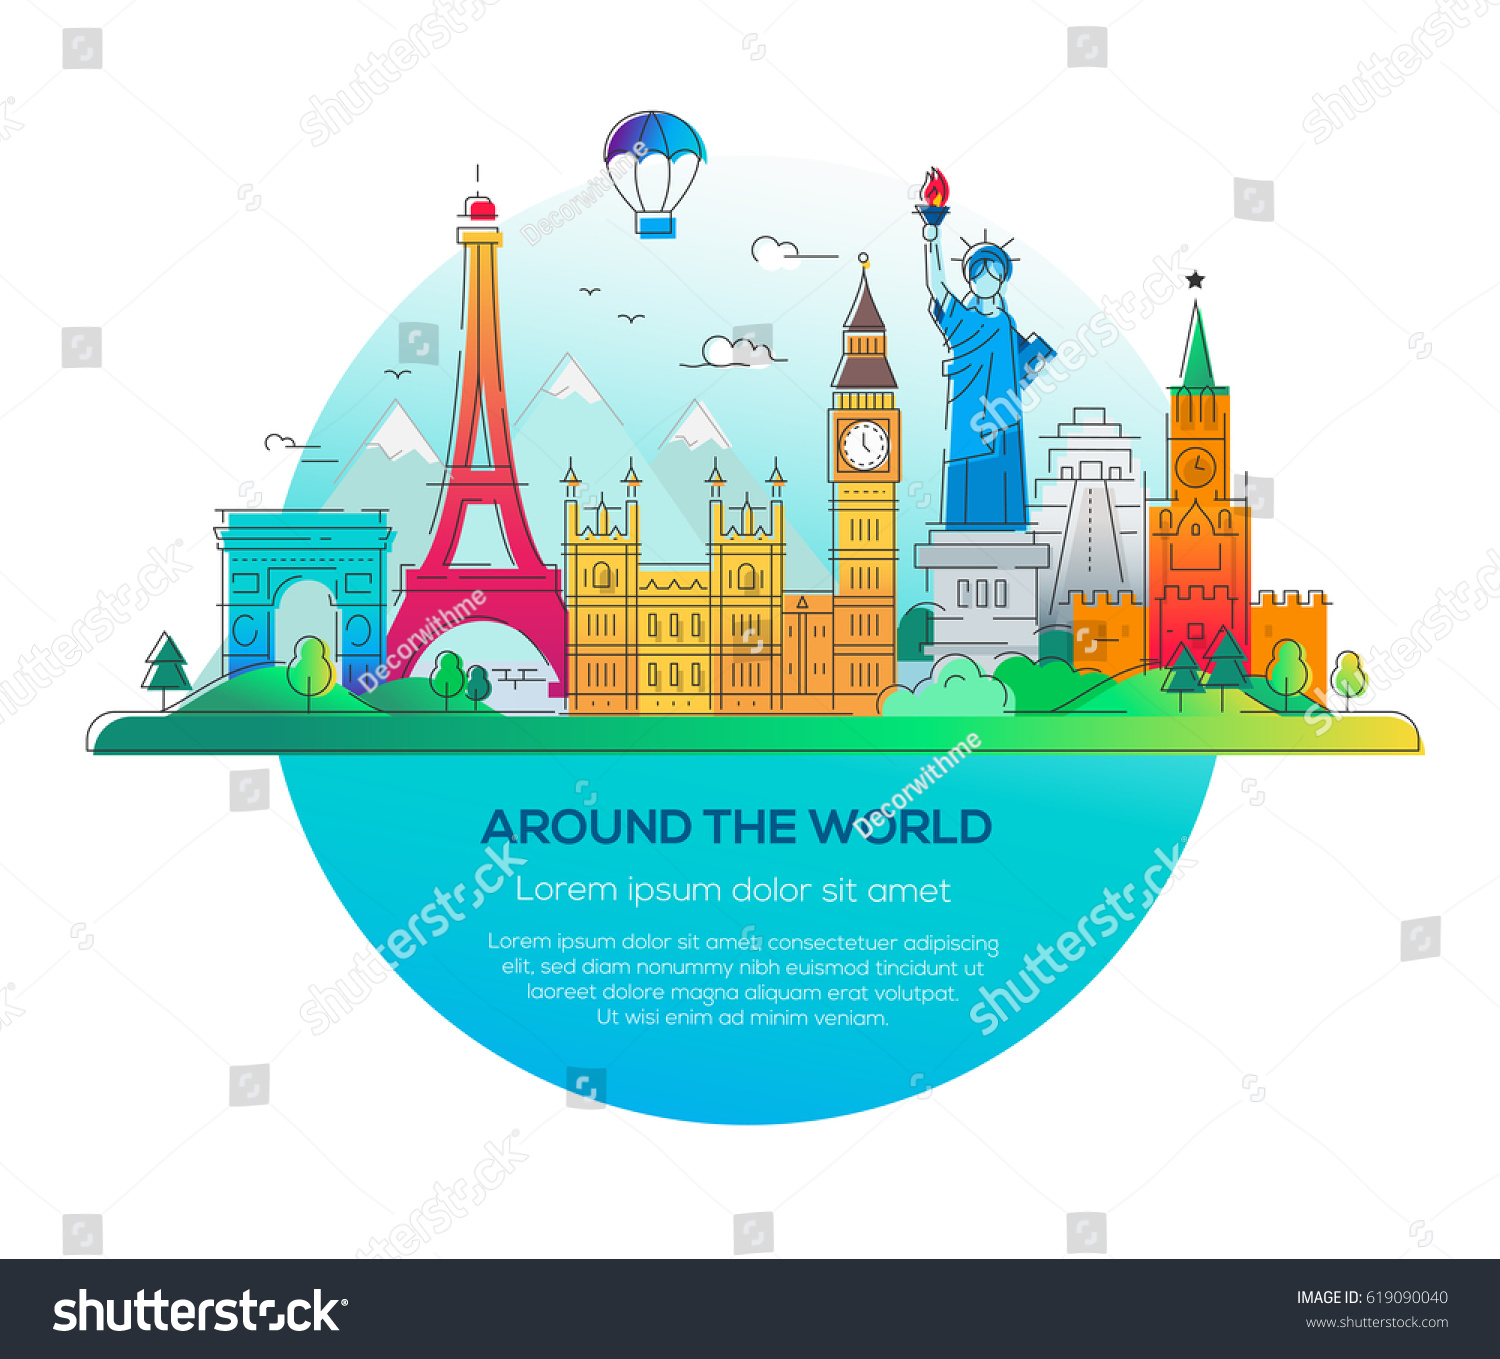 Around the world - modern vector line travel illustration. Discover Russia, England, USA, France. Have a trip, enjoy your vacation.See landmarks like stature of liberty, kremlin, tower #619090040